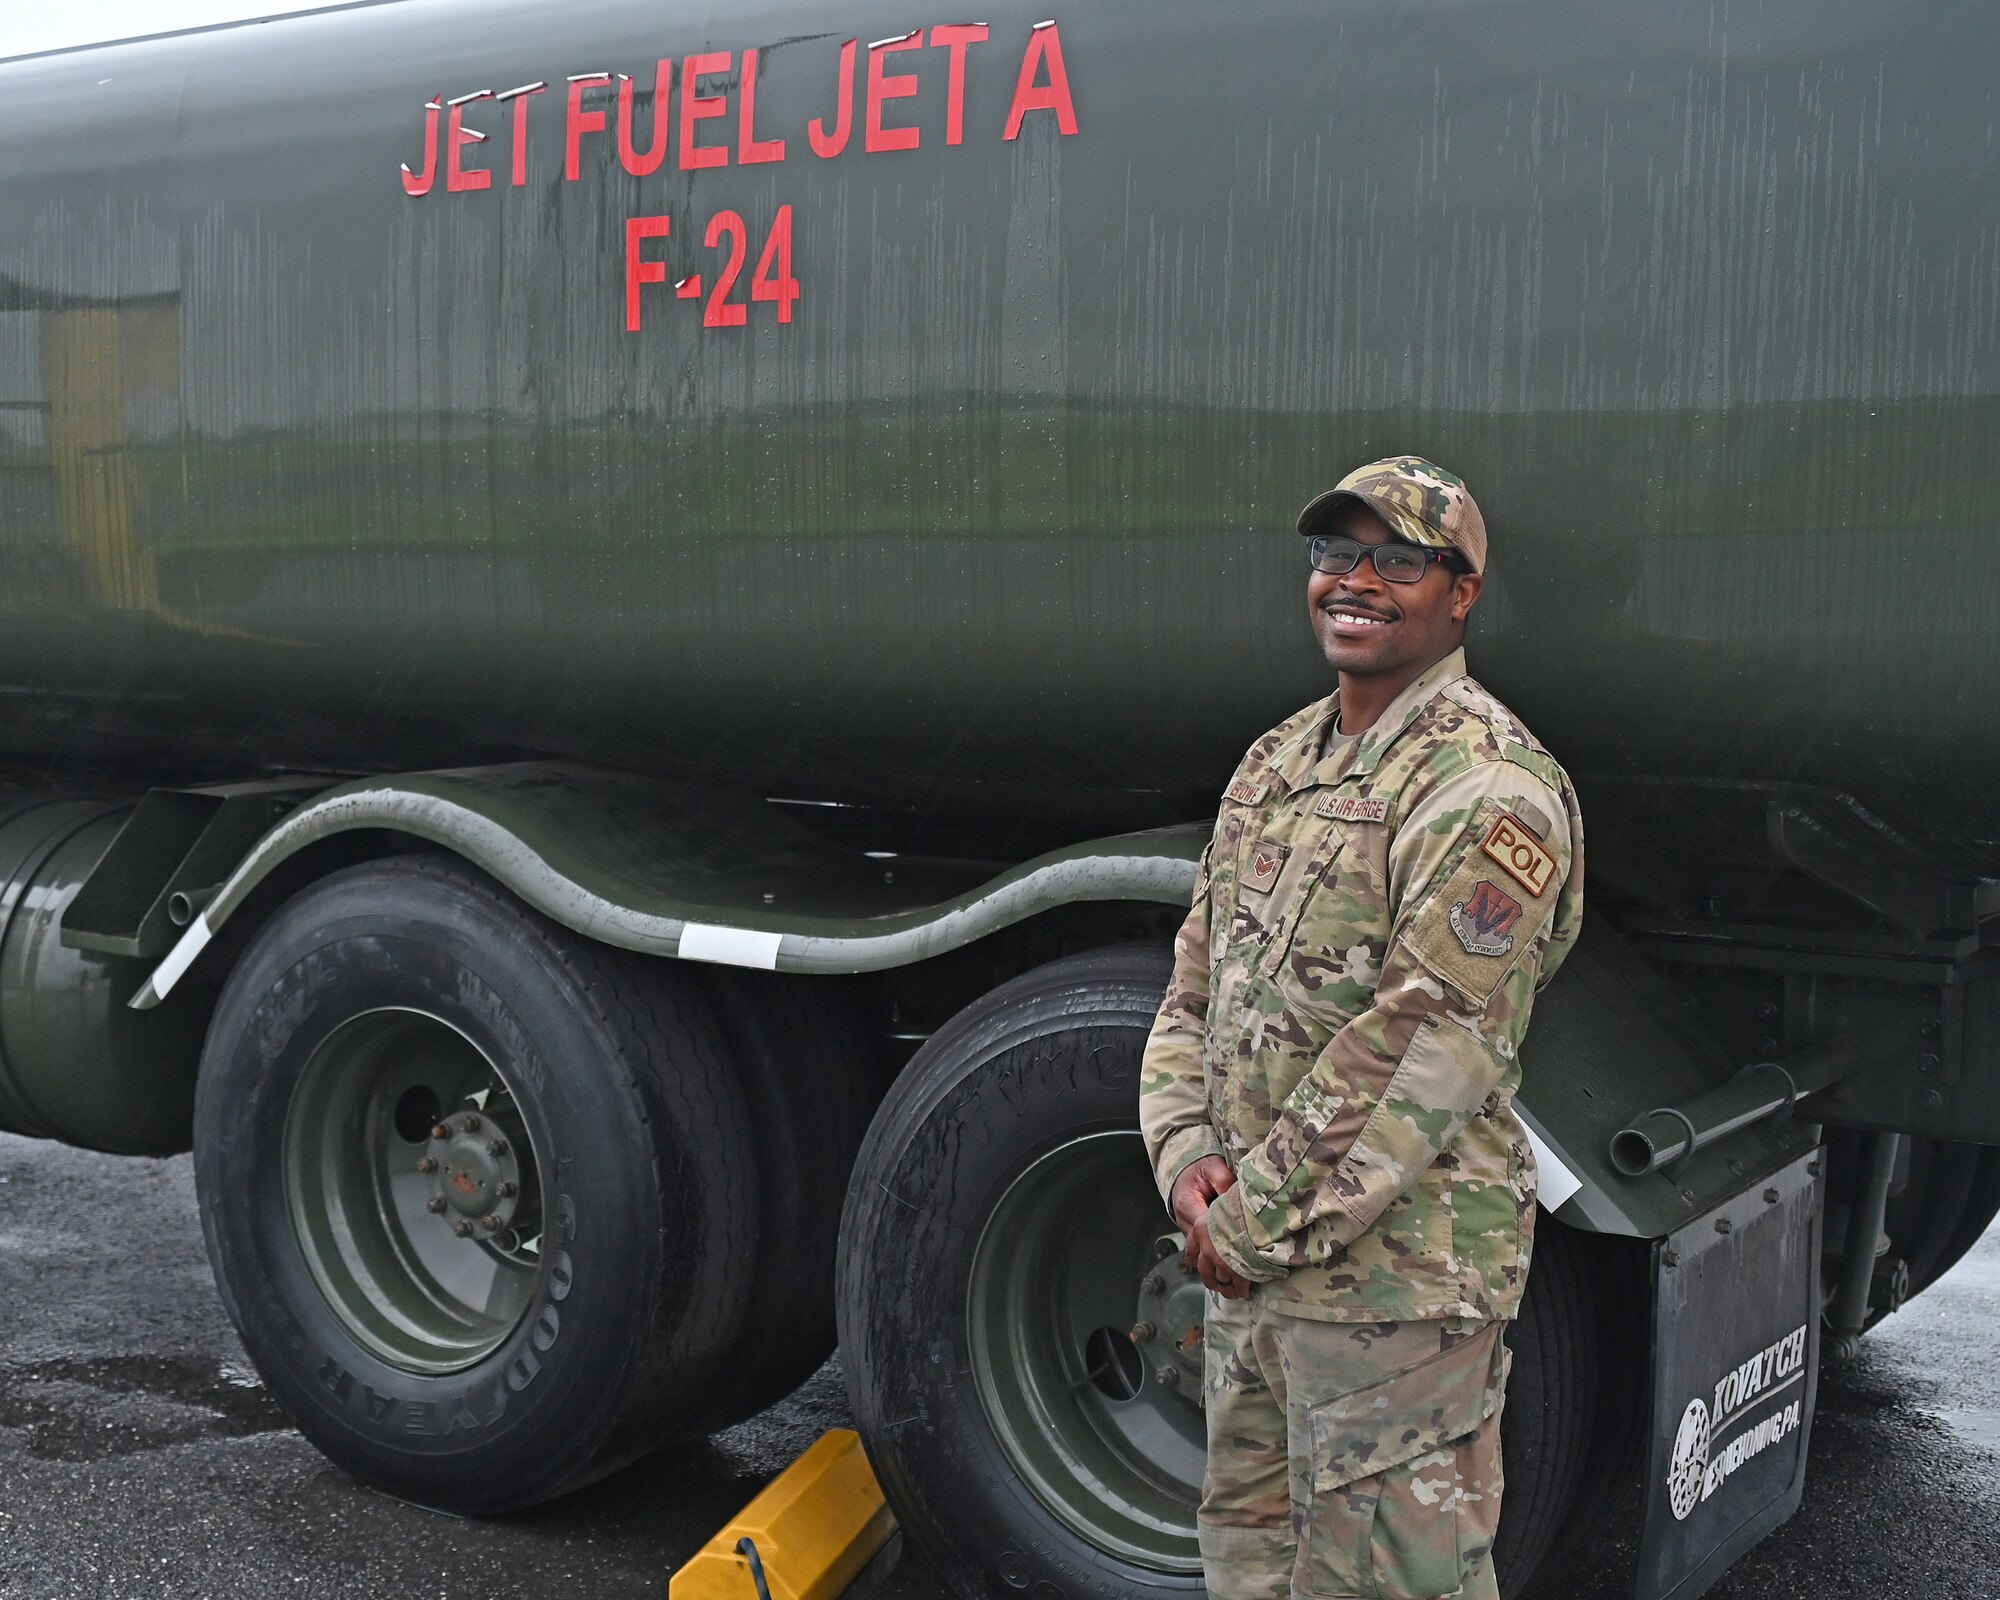 U.S. Air Force Staff Sgt. Terence Bowe, a fuels craftsman assigned to the 175th Mission Support Group, Maryland Air National Guard, poses for a photograph next to a fuel truck at Warfield Air National Guard Base, Middle River, Md., June 23, 2022.